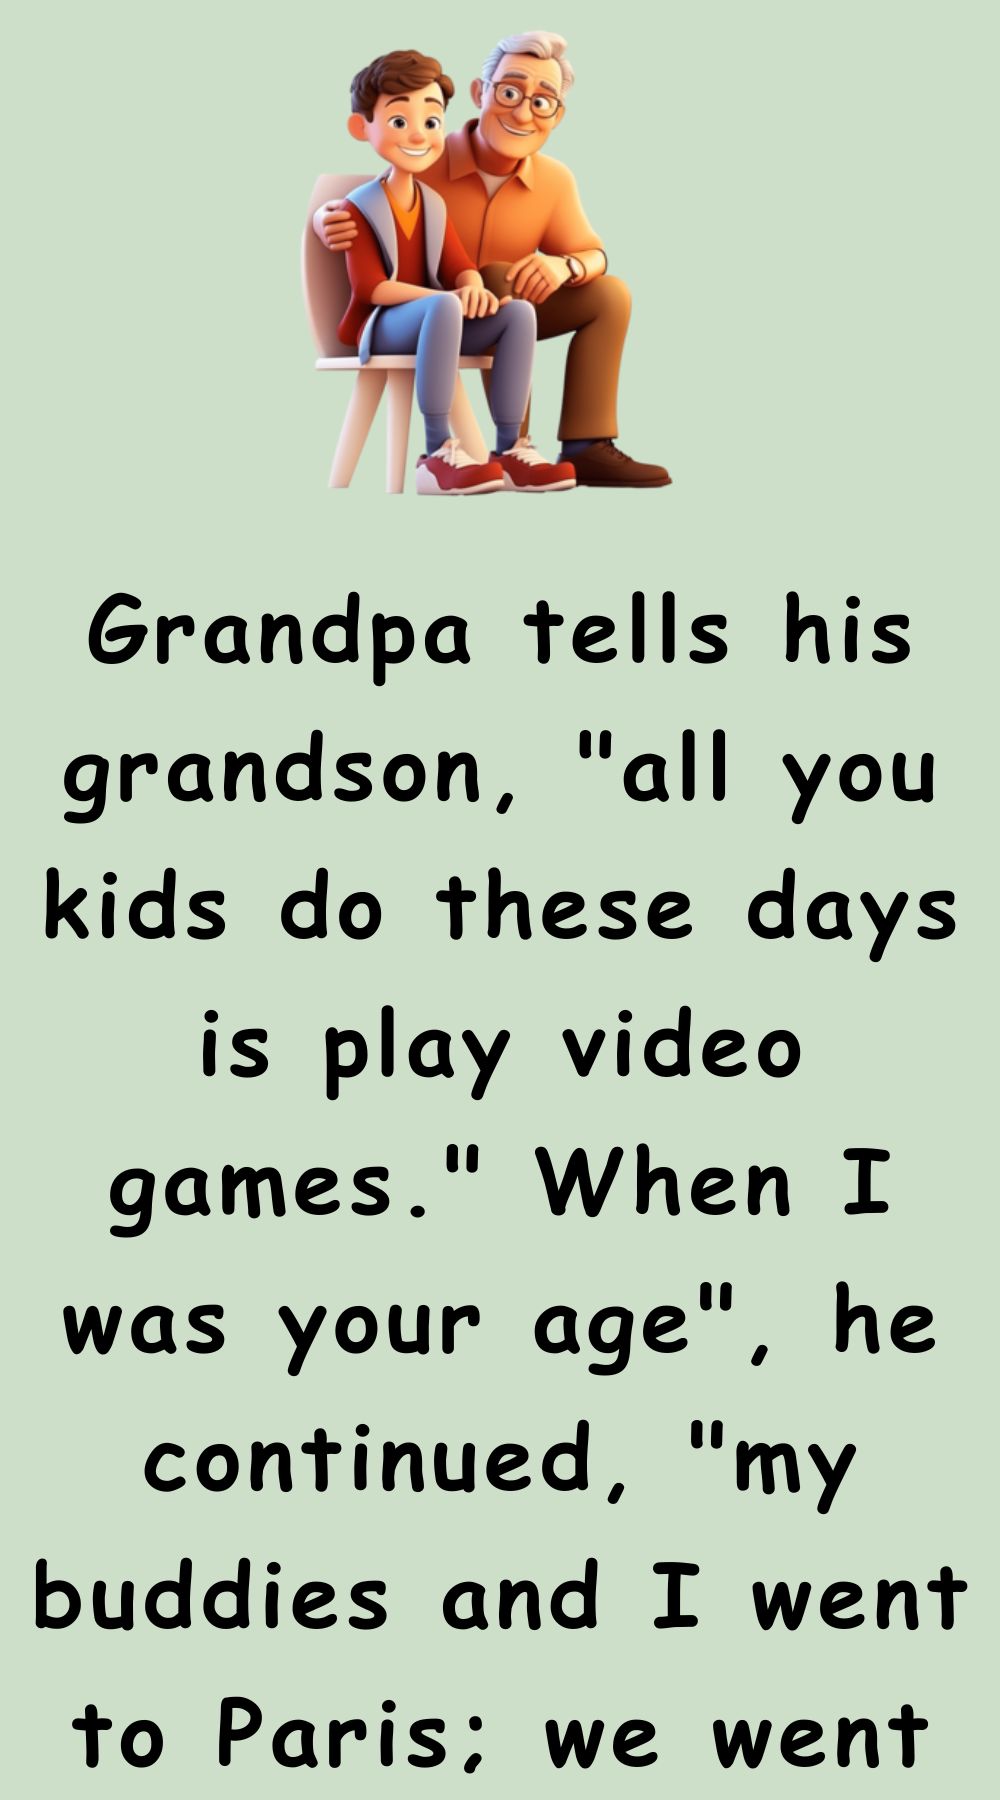 The grandson thinks his grandfather is right